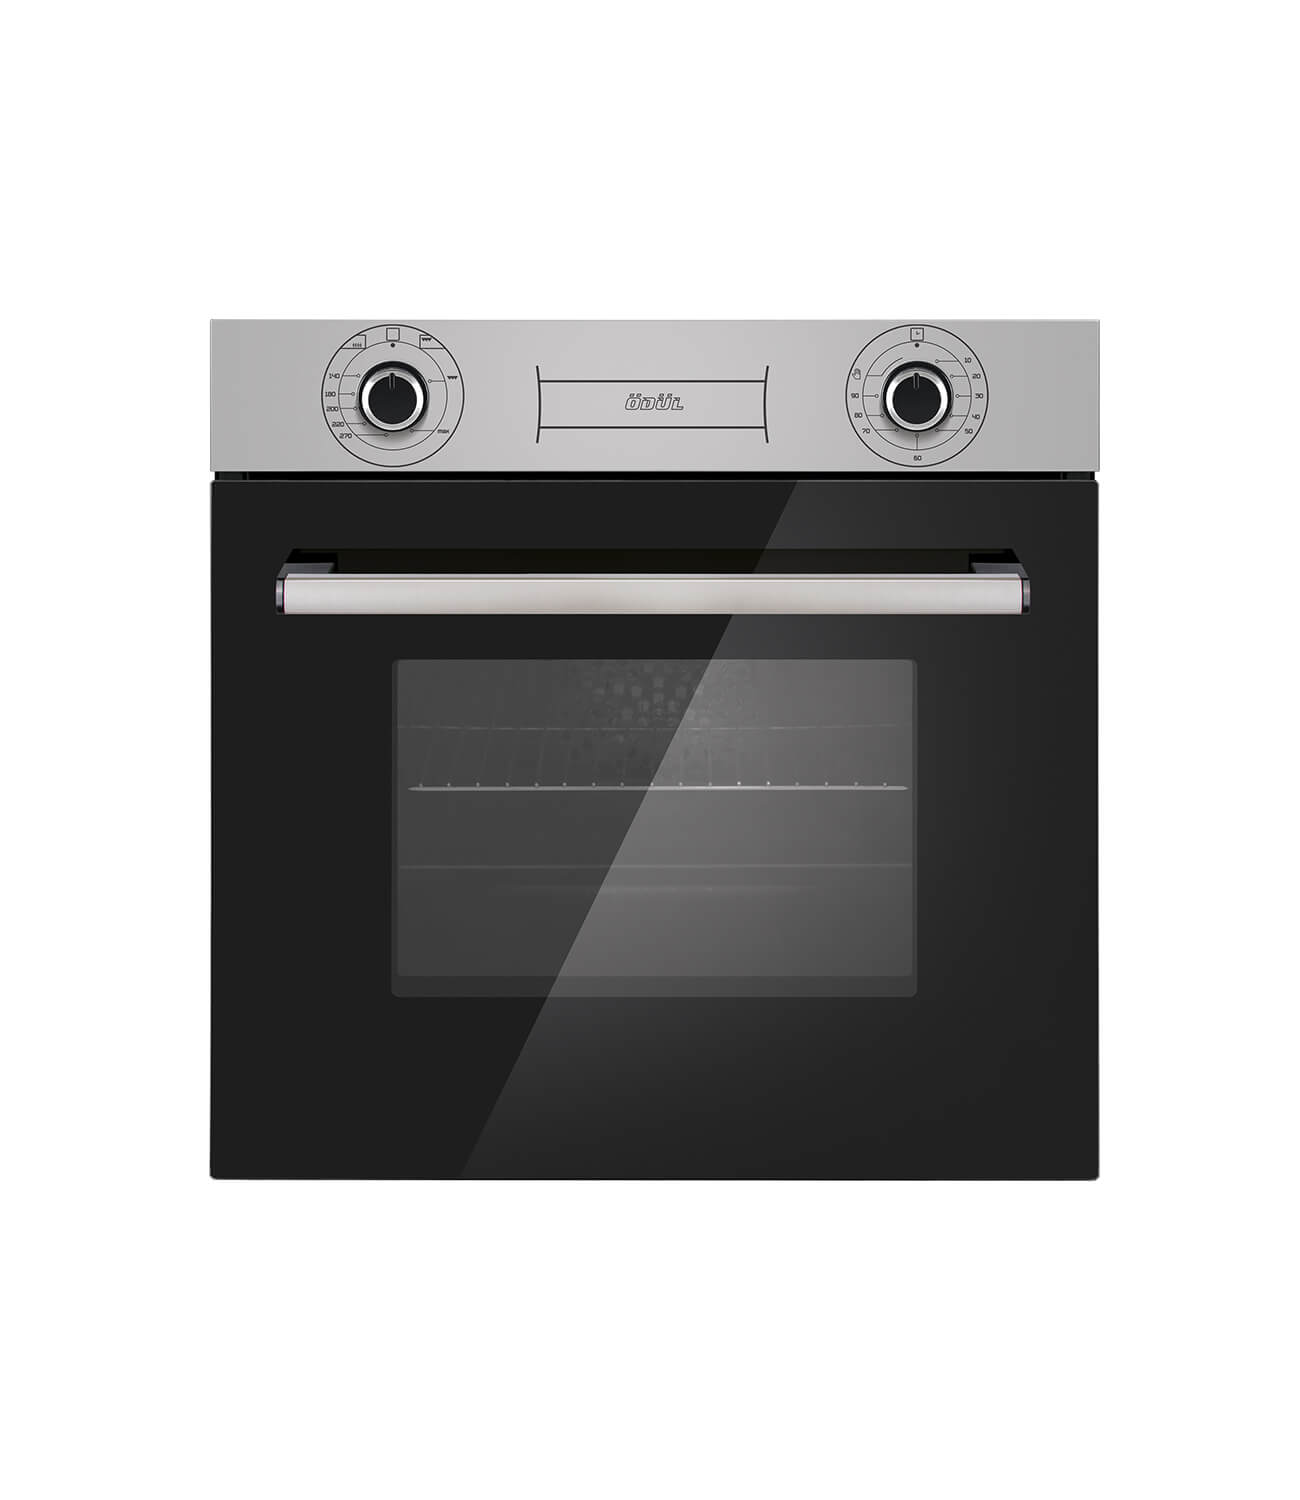 BO-60 electrical oven